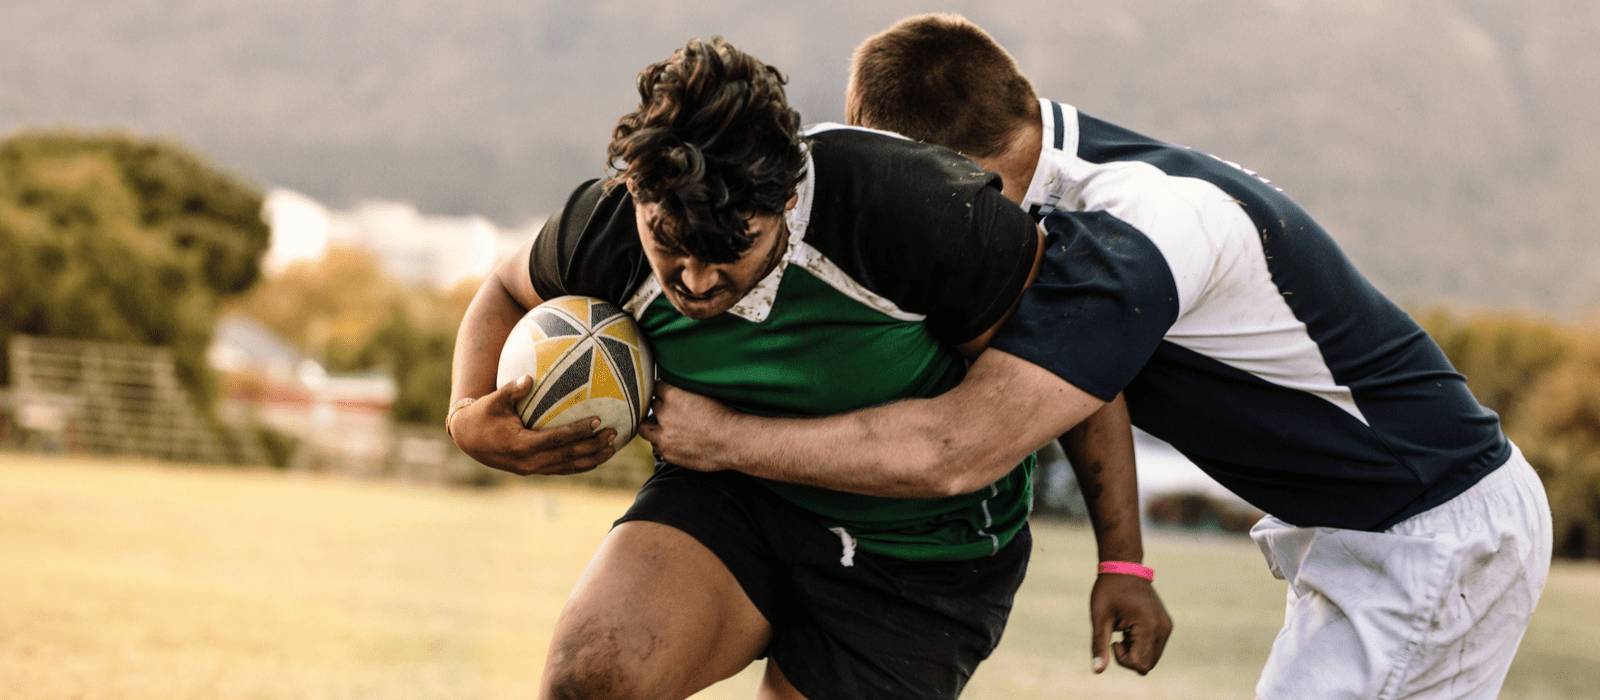 Two men playing rugby tackling while holding rugby ball